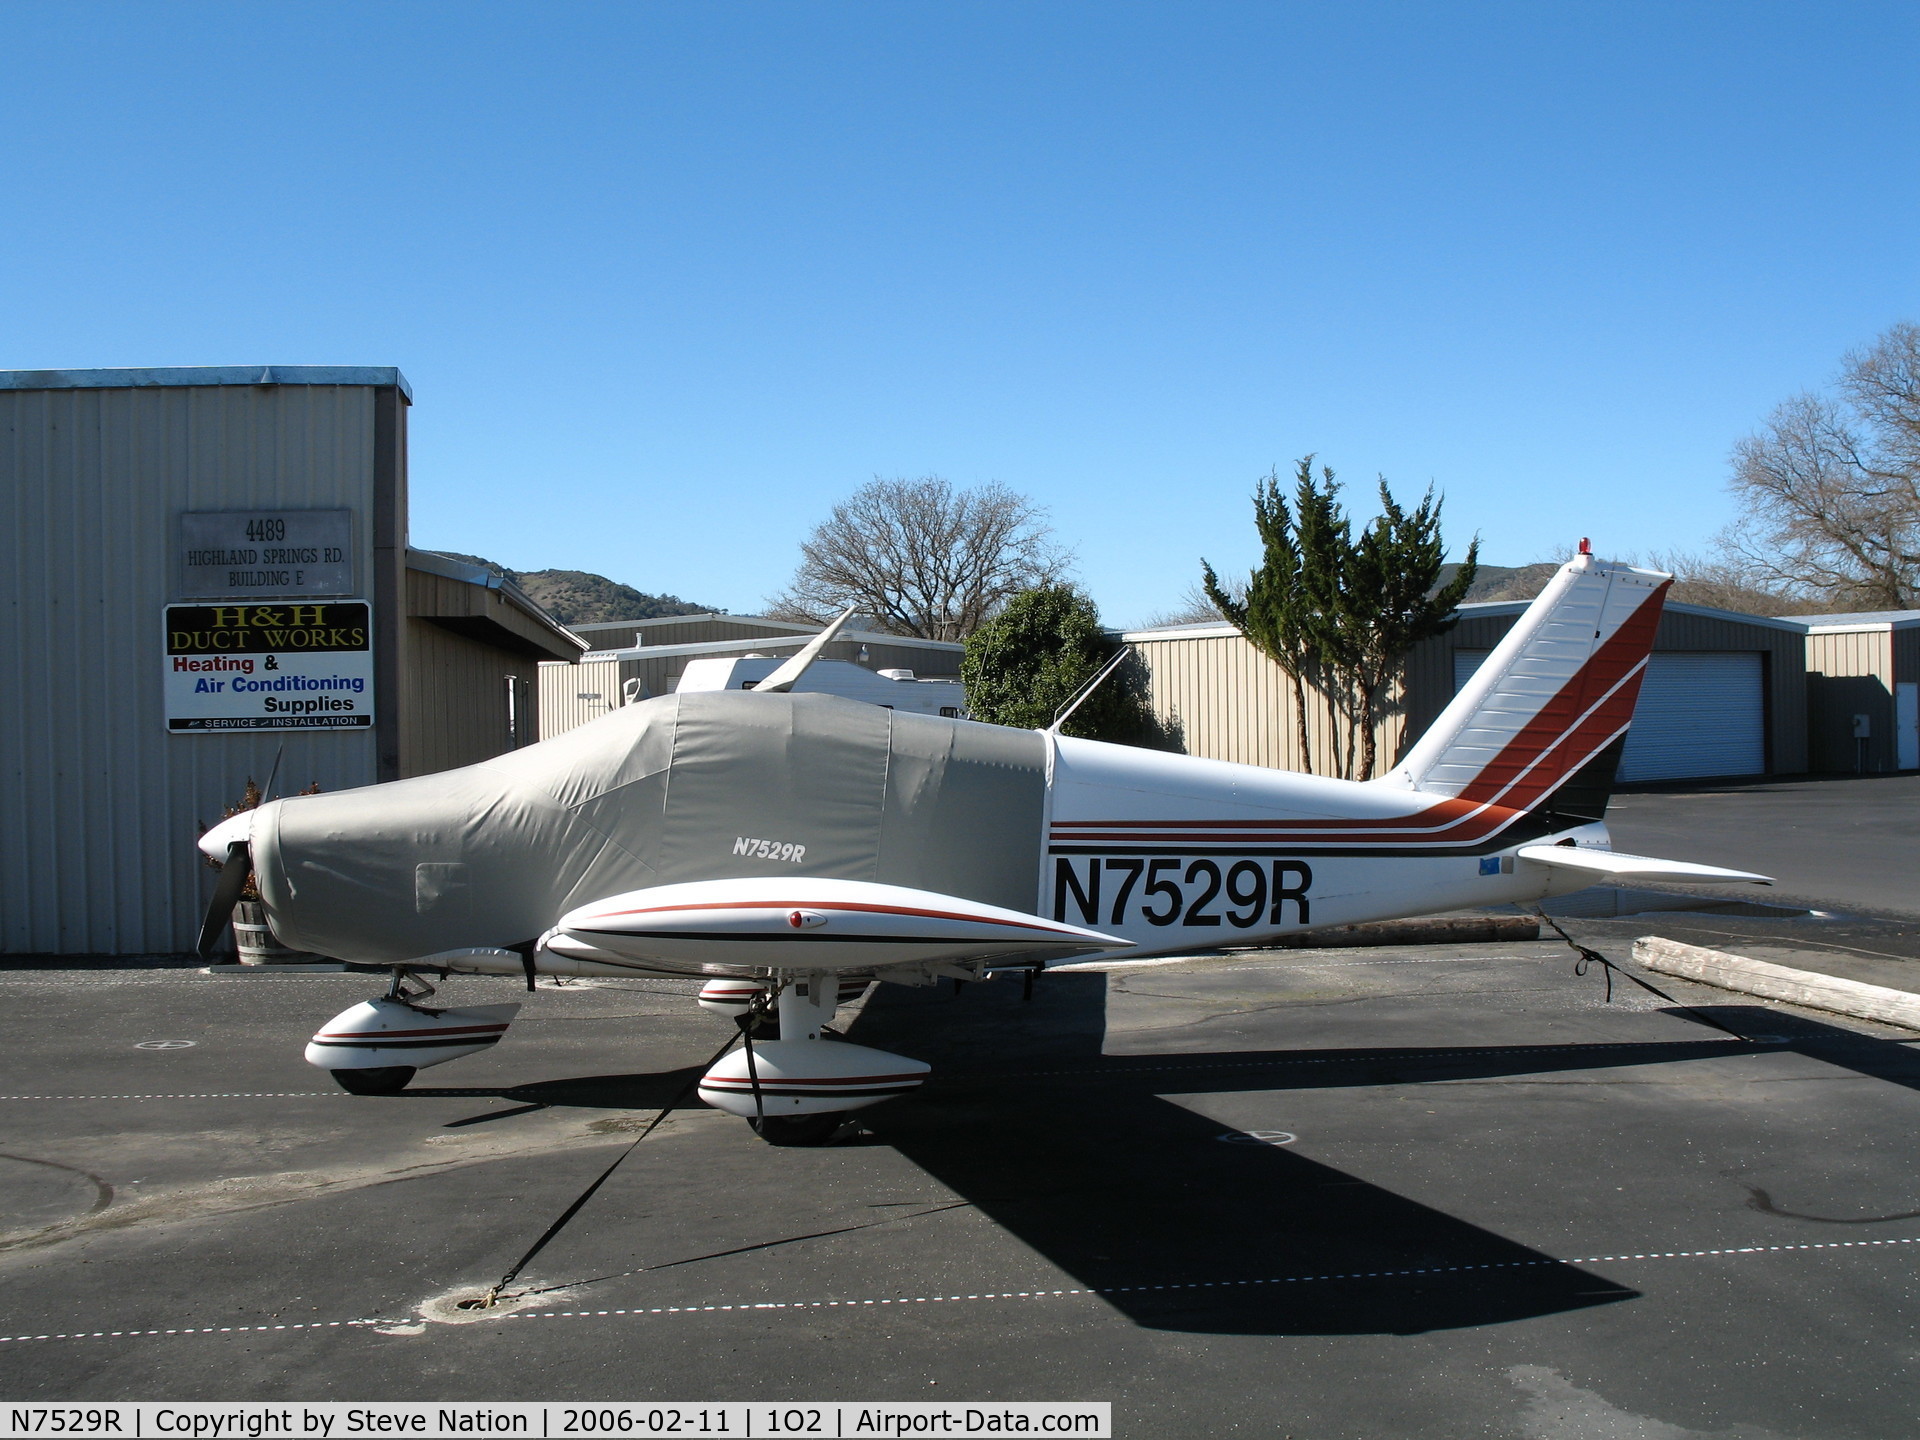 N7529R, 1966 Piper PA-28-140 C/N 28-22087, 1966 Piper PA-28-140 with half body cover at Lampson Field (Lakeport), CA